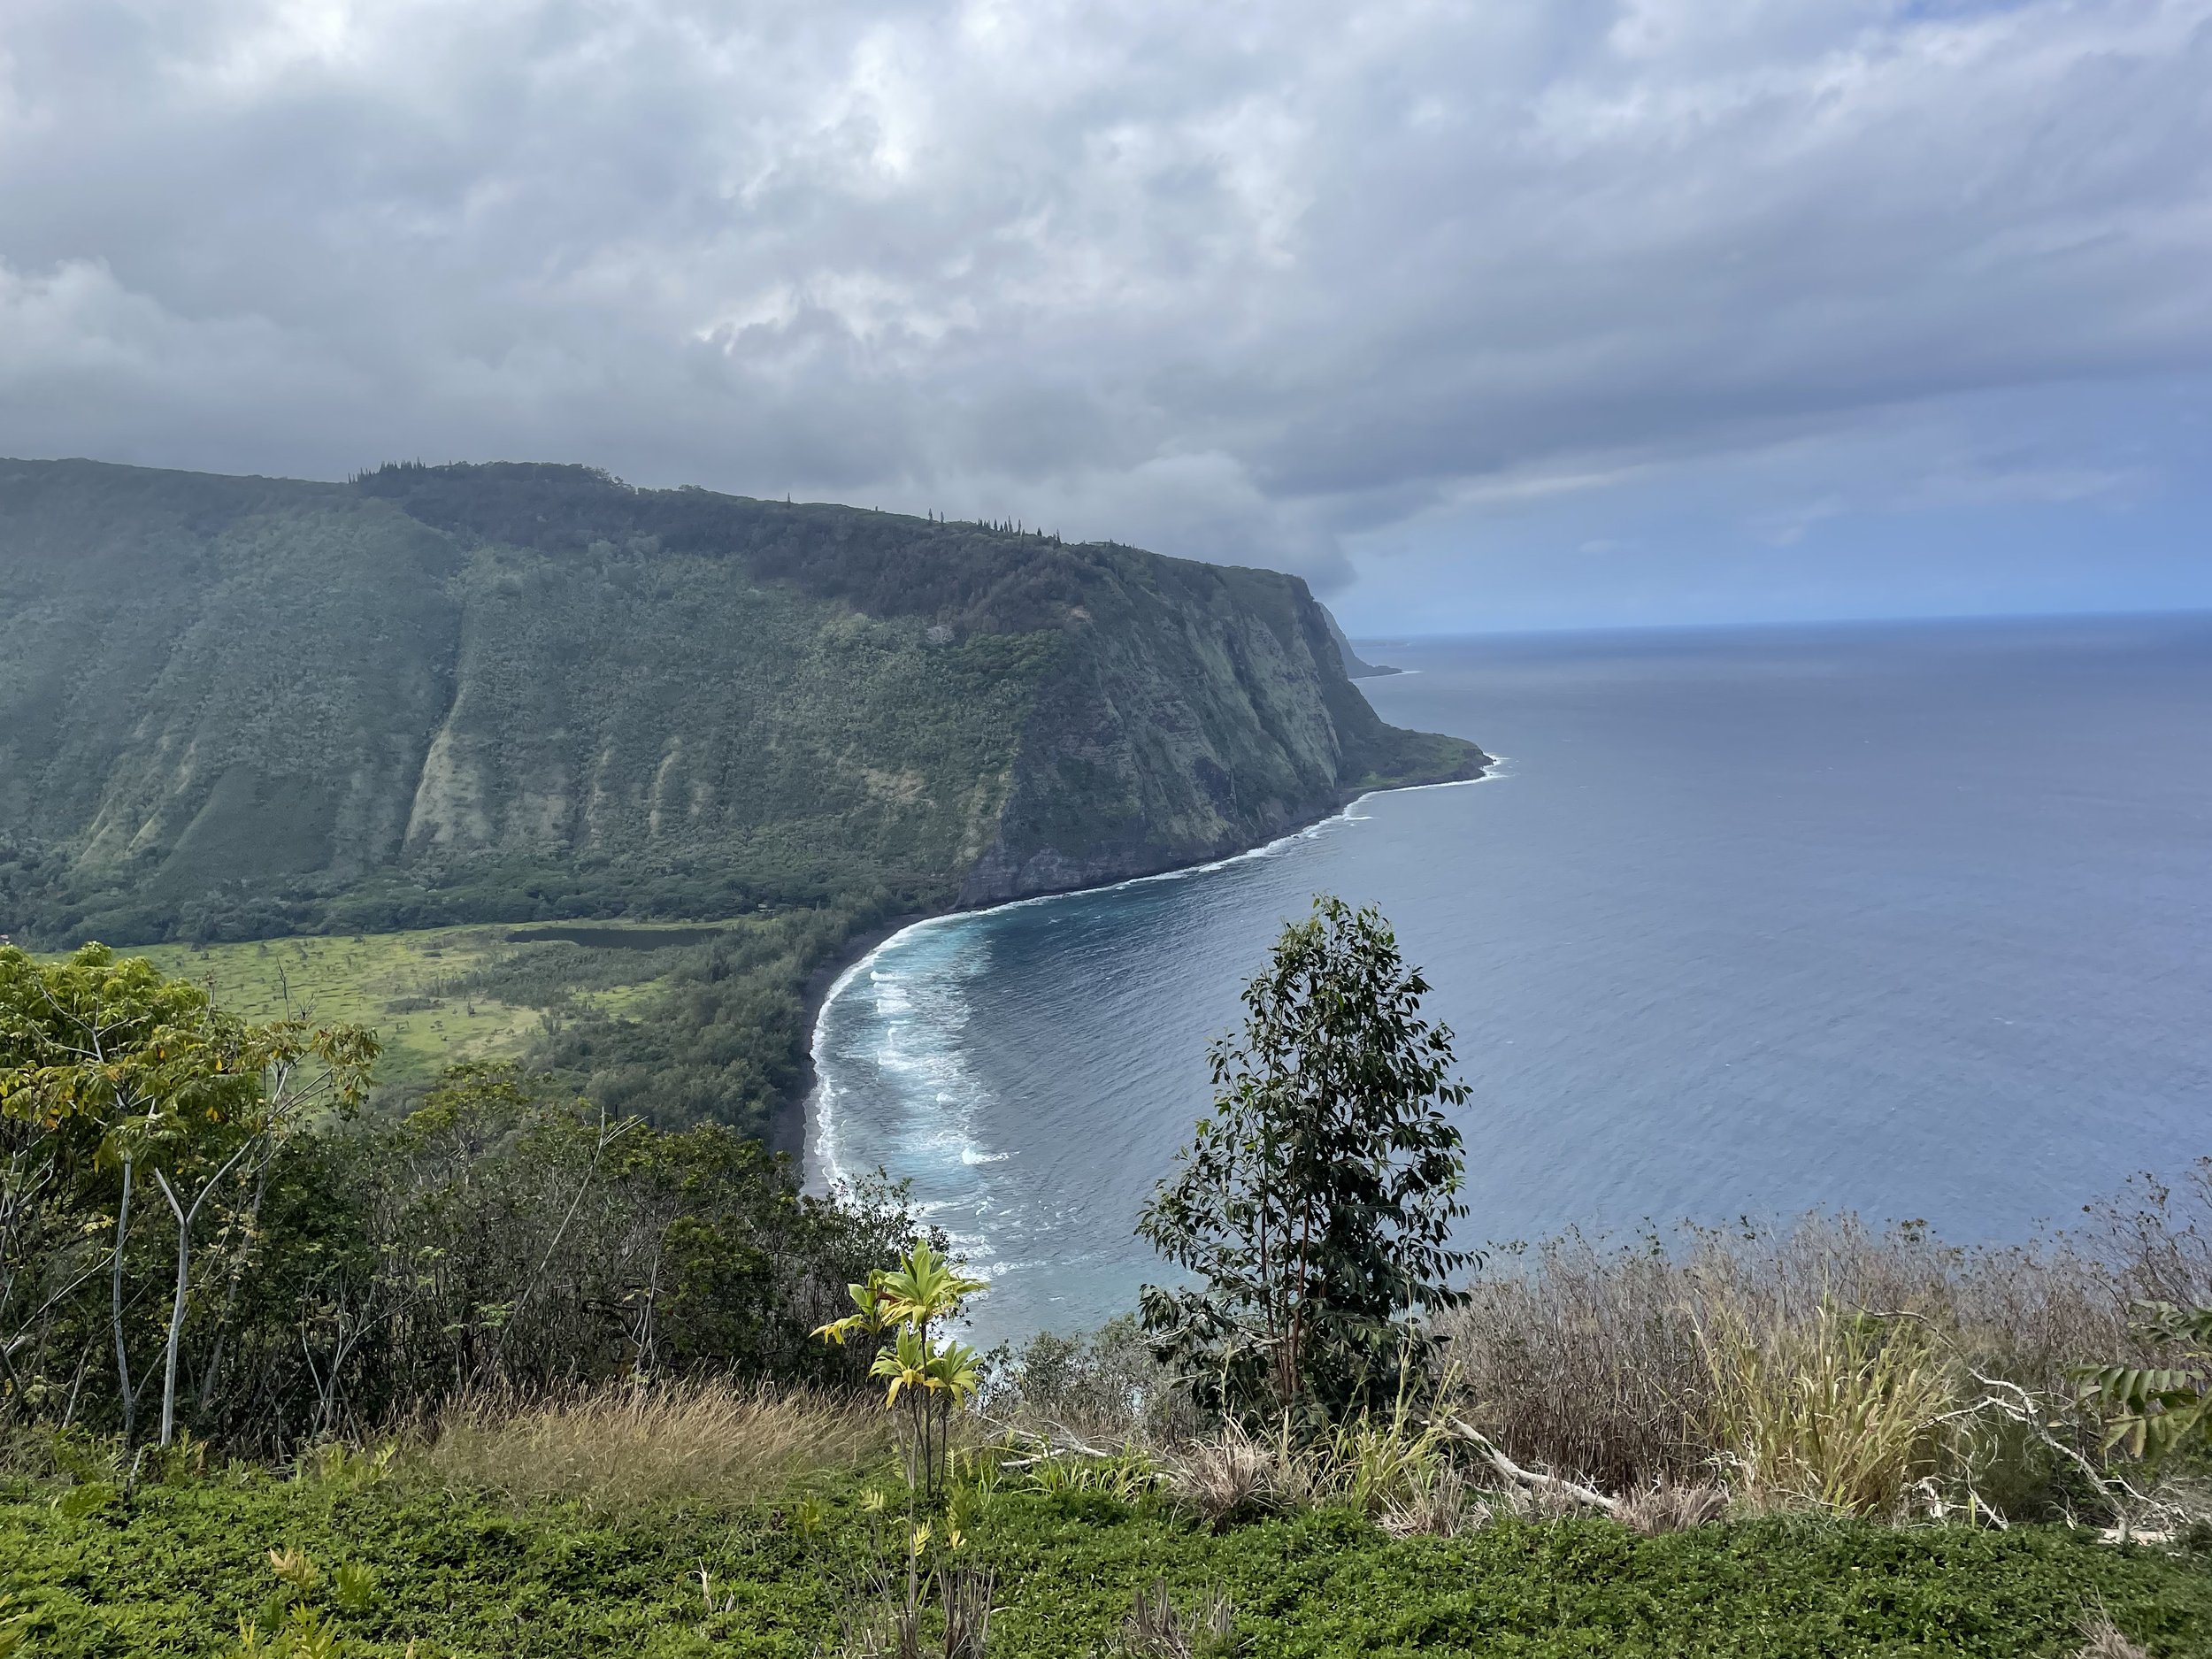 Top things to do in Hilo now - This Hawaii Life